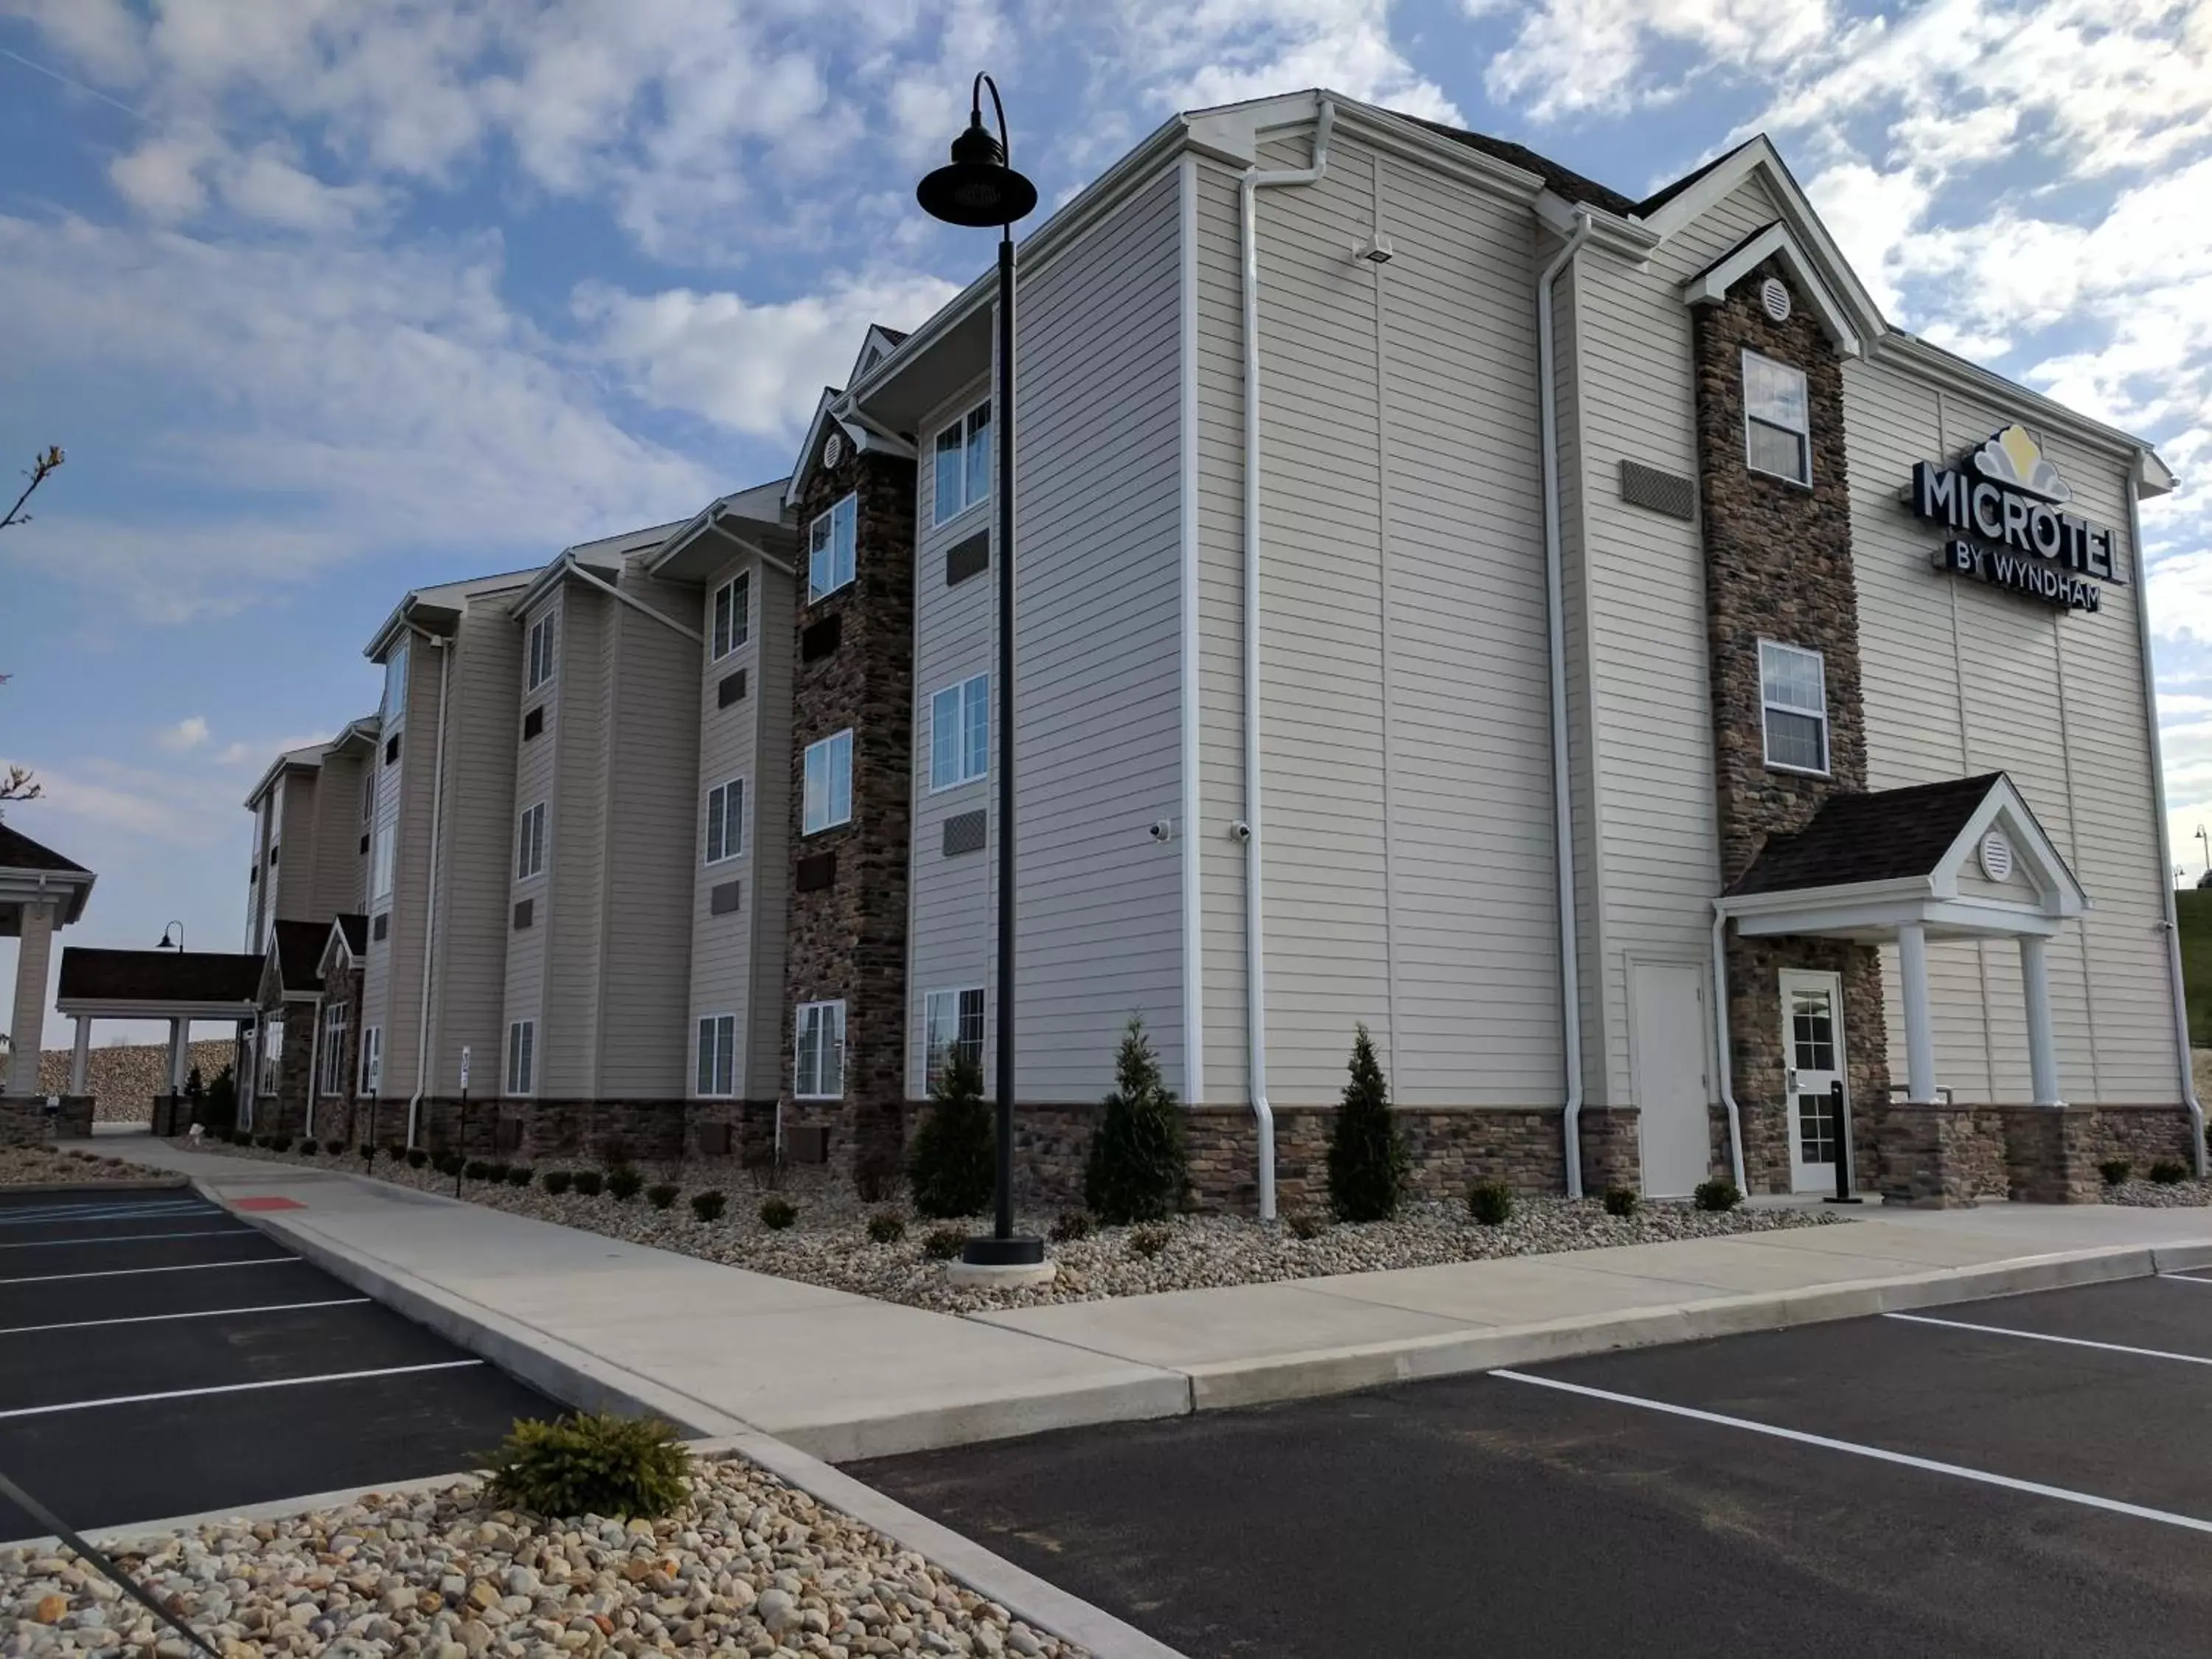 Property Building in Microtel Inn & Suites by Wyndham Clarion